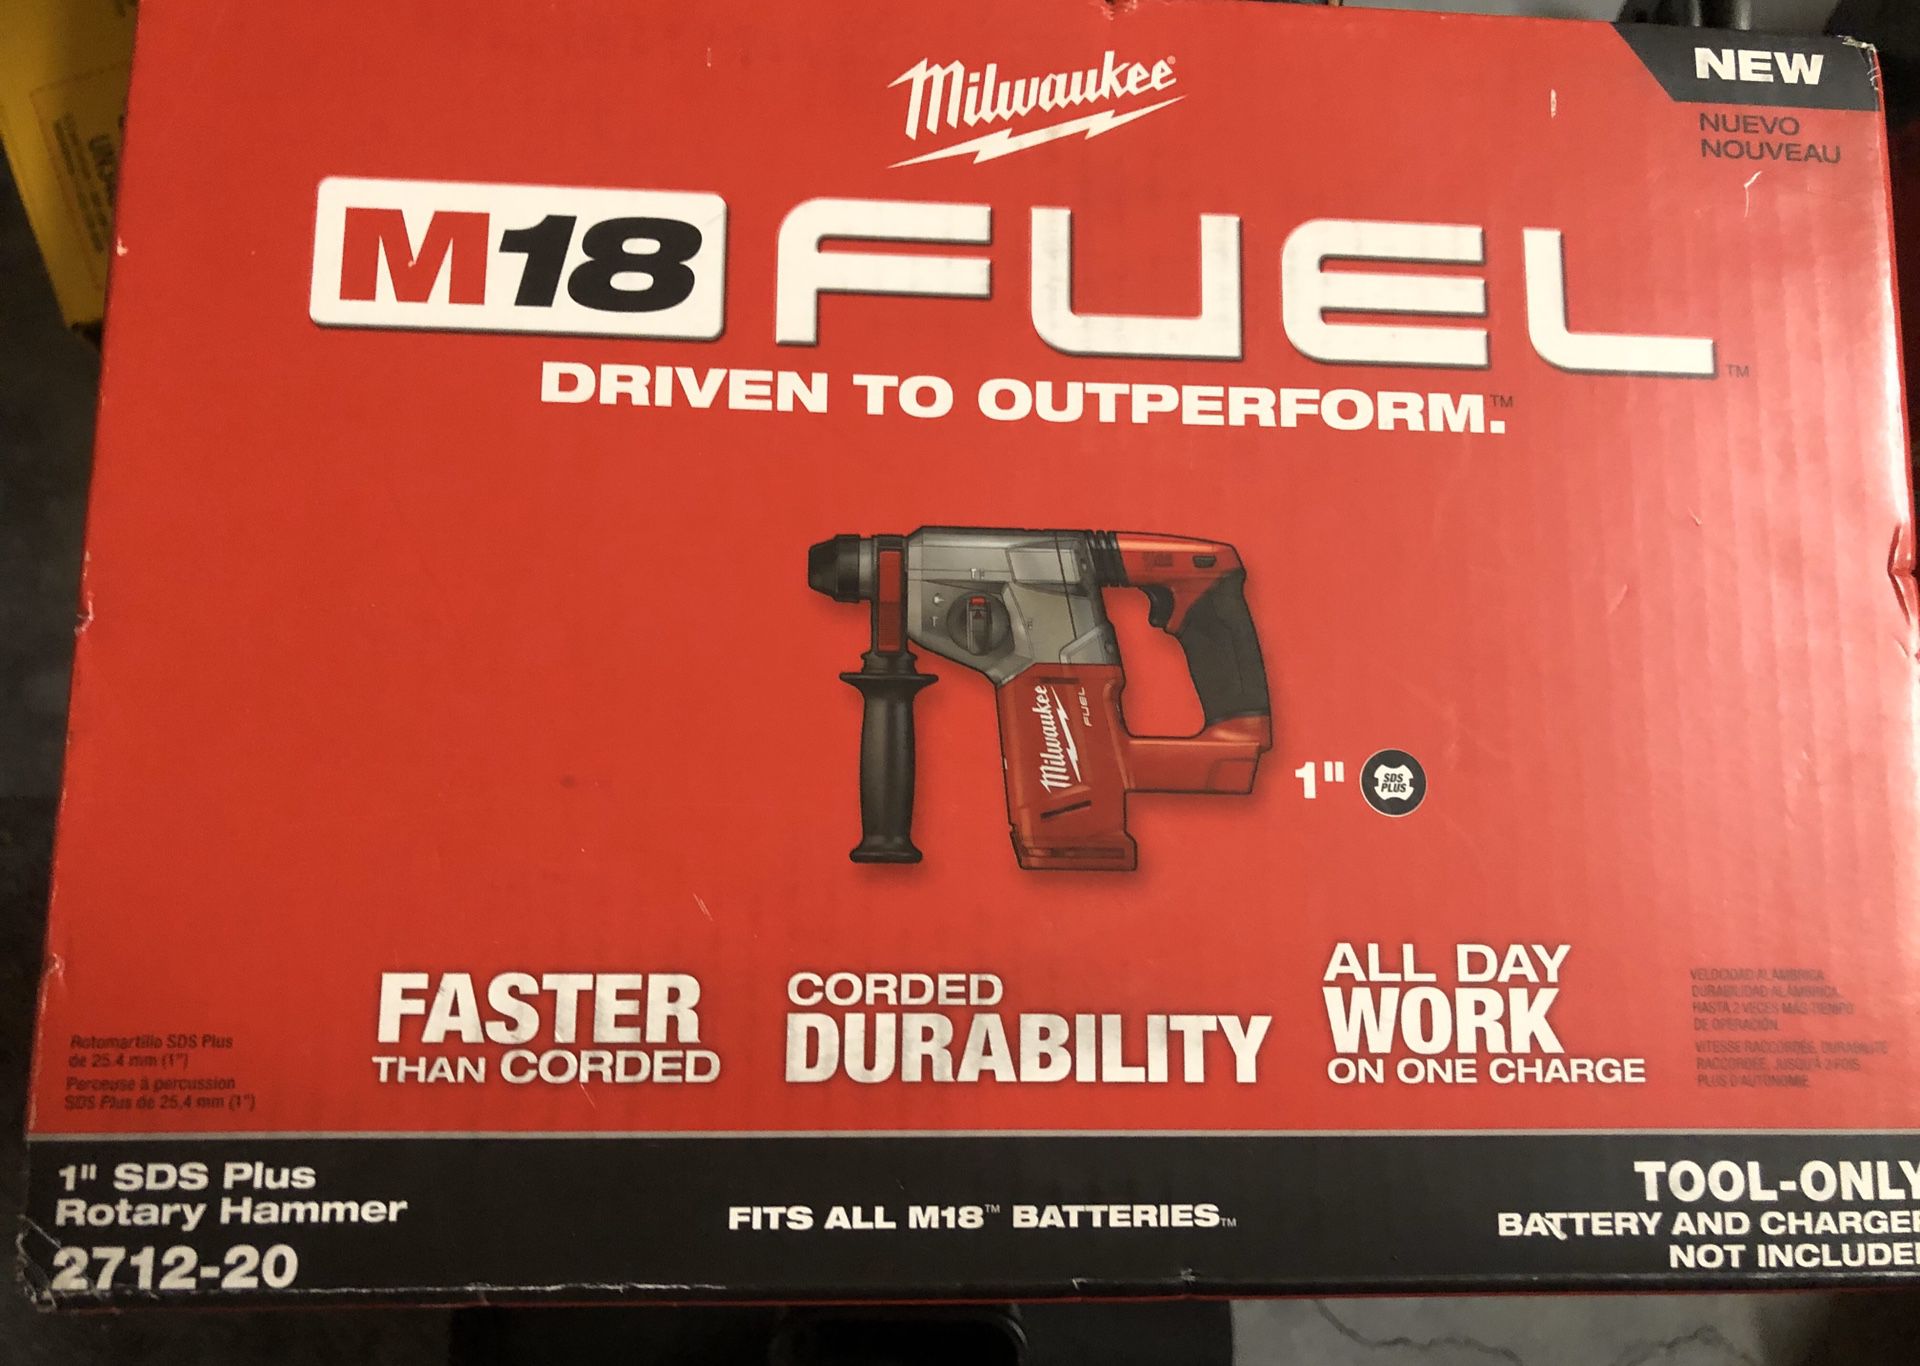 New Milwaukee rotary hammer 2712-20 tool only